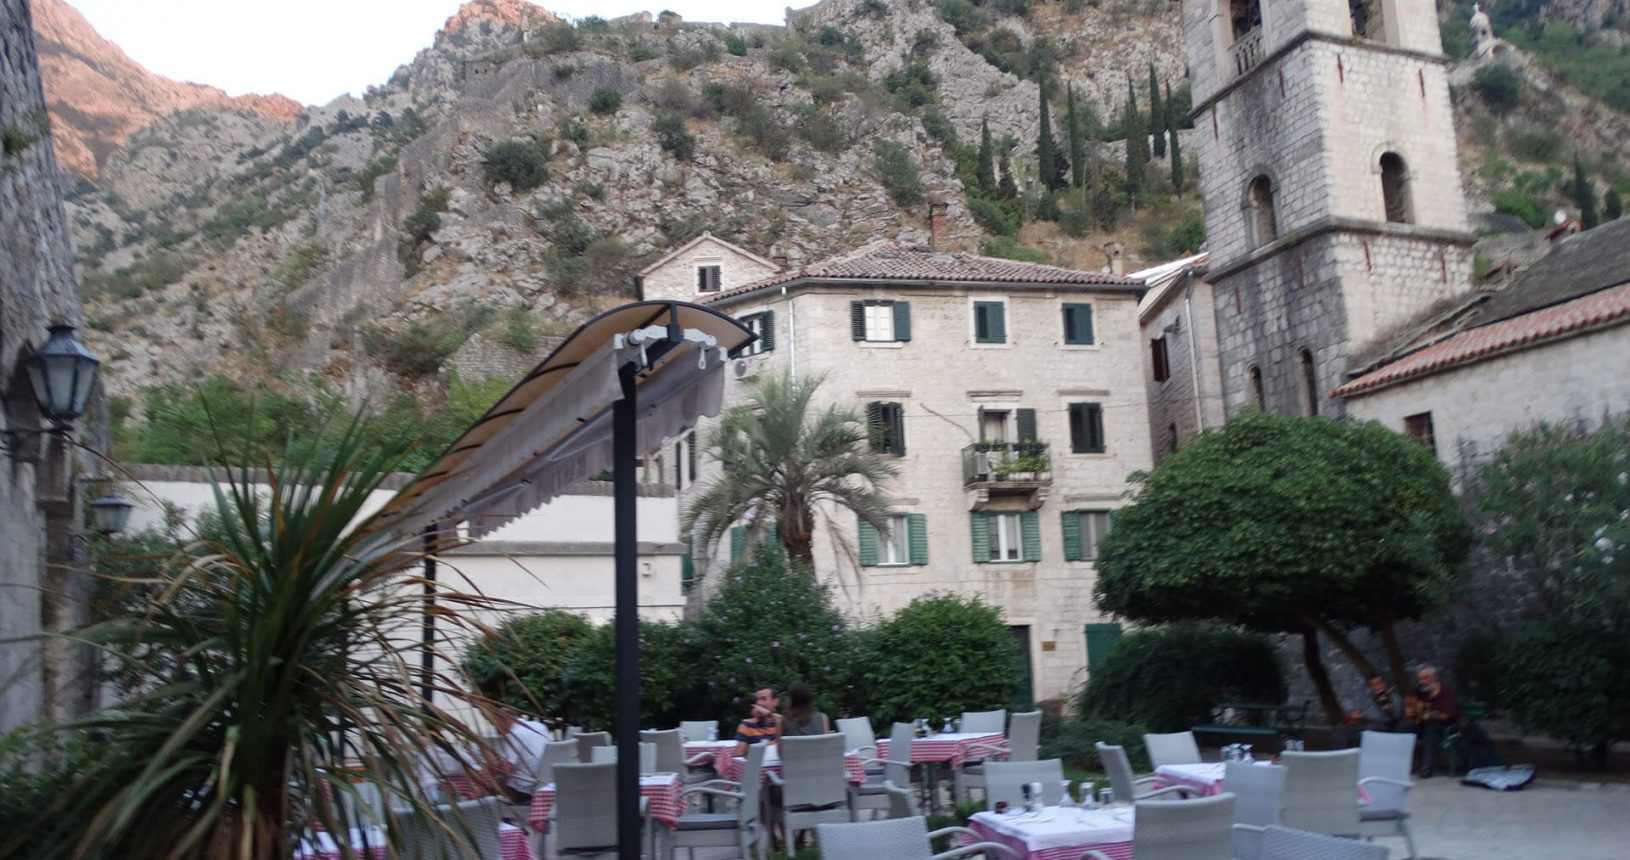 Inside the Old Town of Kotor